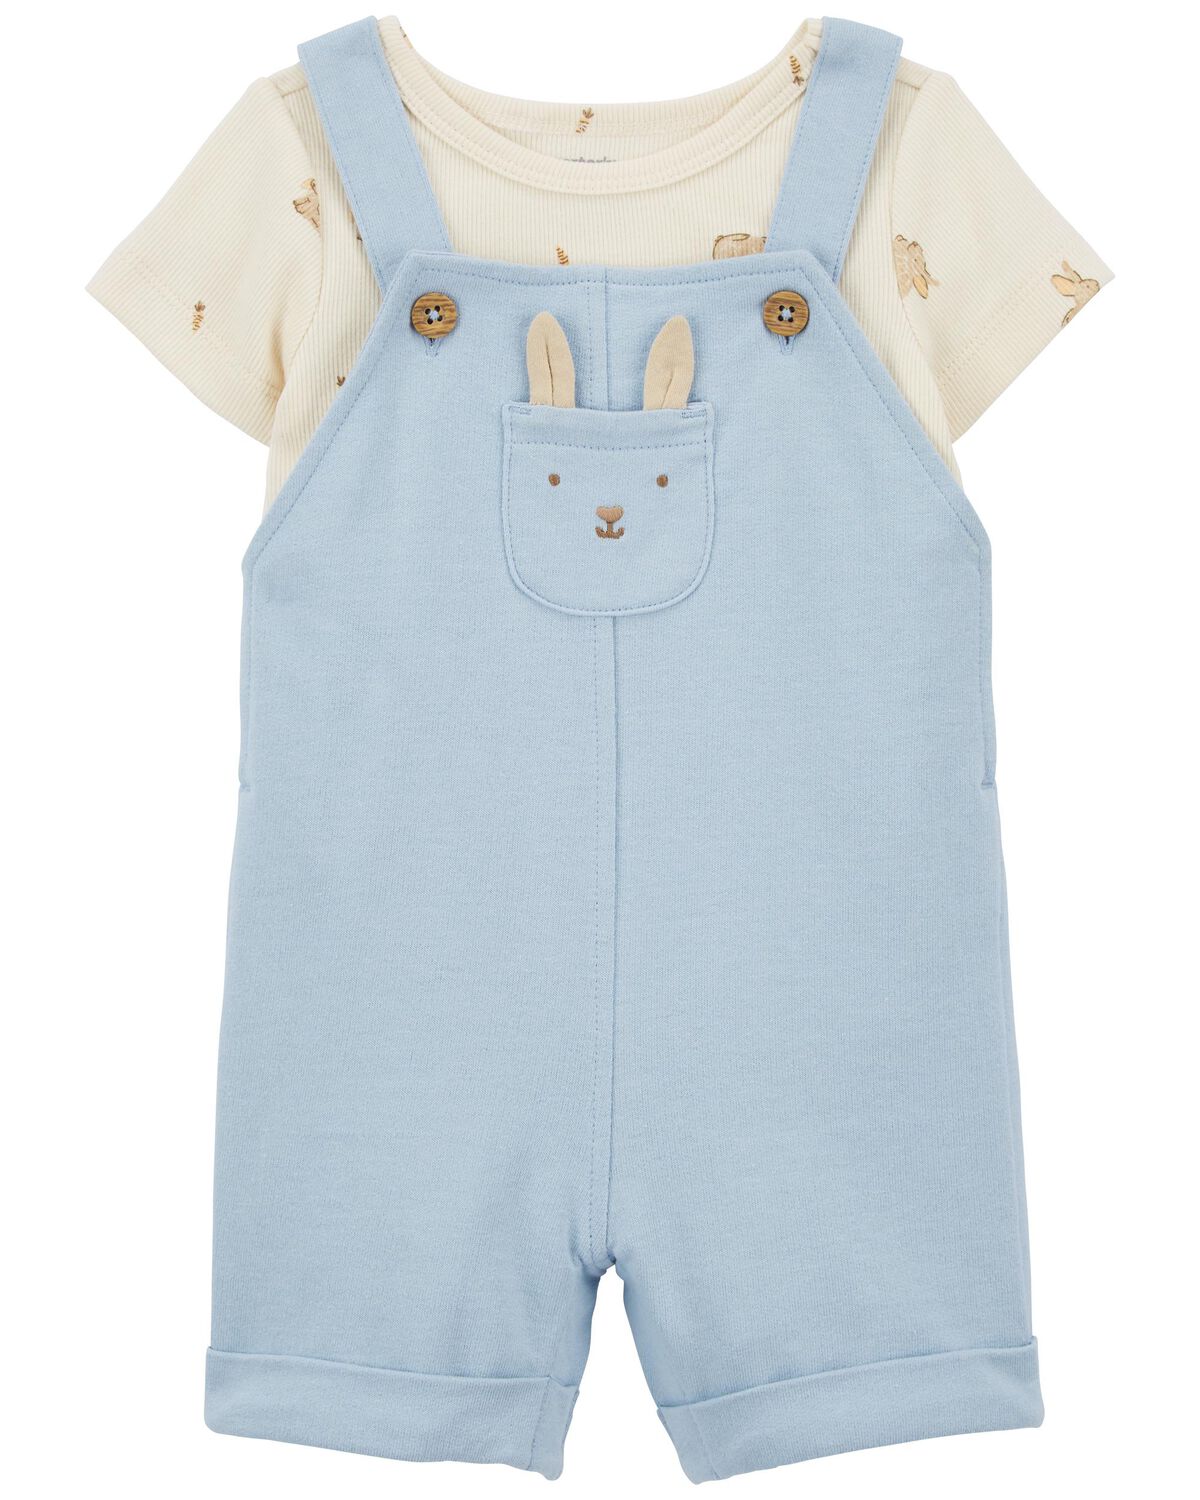 Carter's Thermal Bodysuit Kitty Patch - Blue